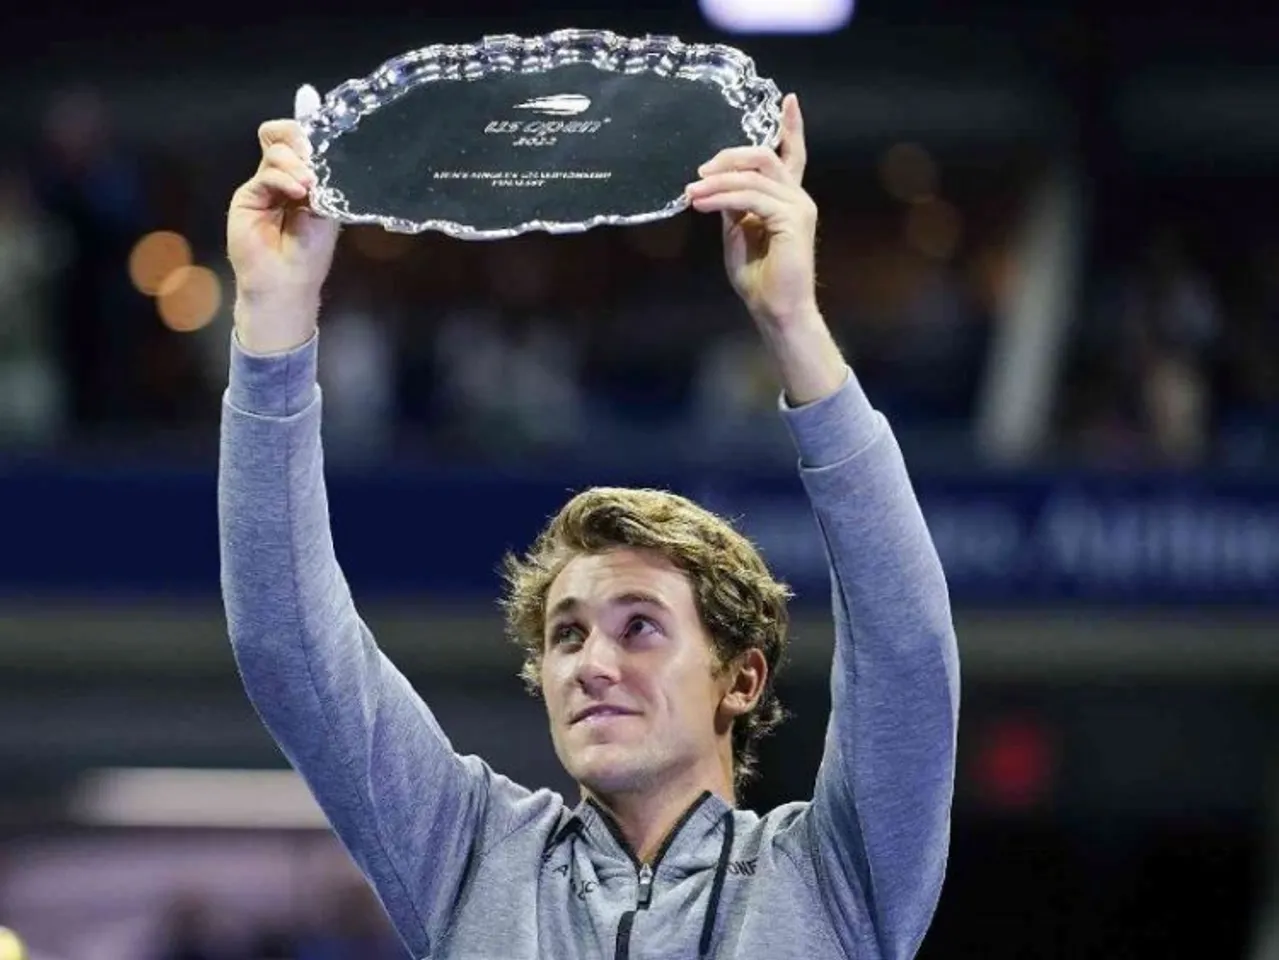 Casper Ruud of Norway, holds up the runner-up trophy after losing to Carlos Alcaraz, of Spain, in the men's singles final of the U.S. Open tennis championships